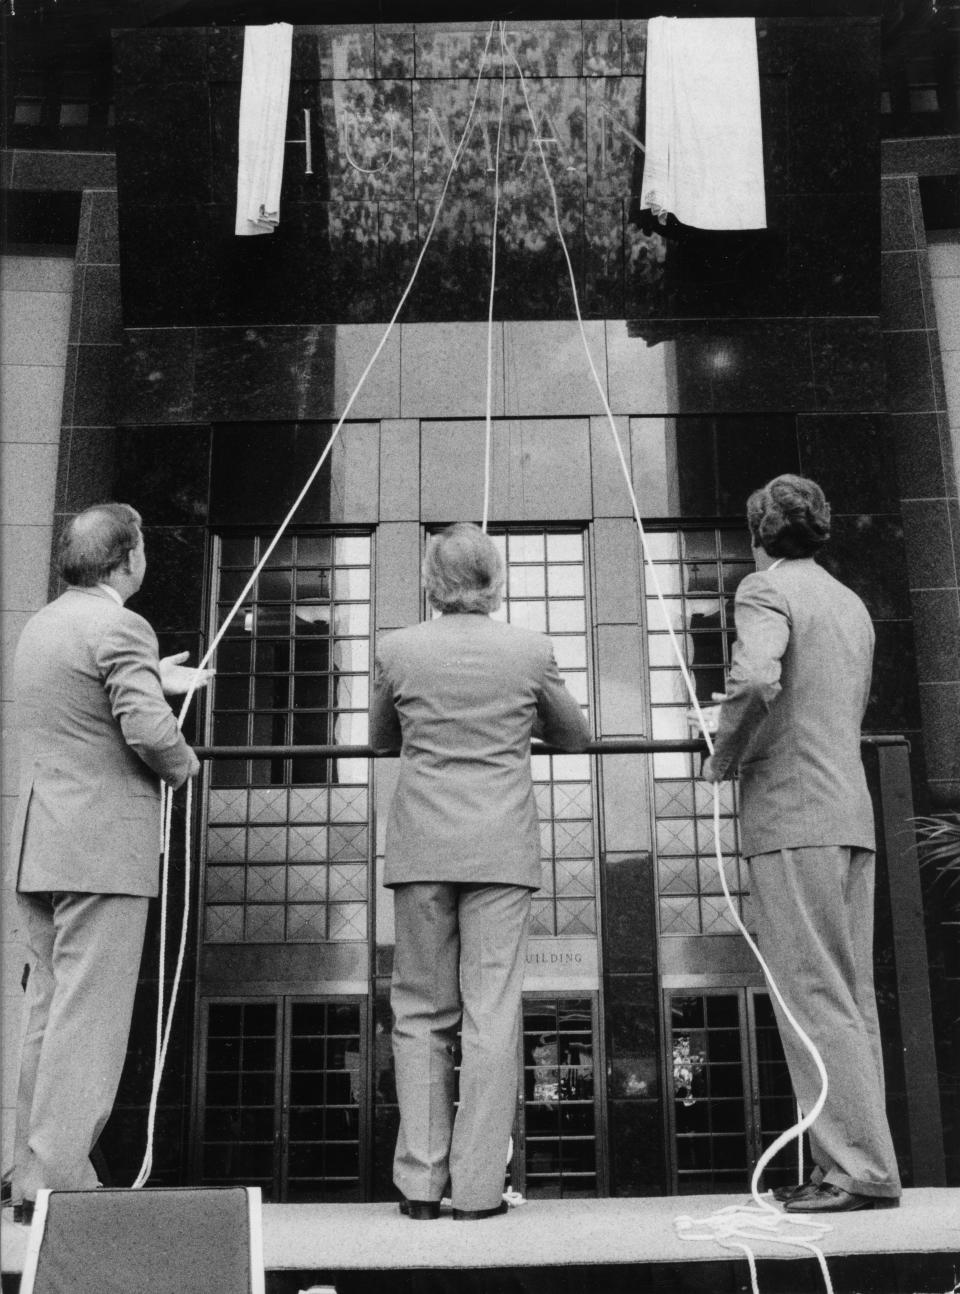 C-J FILE photo
During the 1985 dedication ceremony for the new Humana building downtown, David Jones, left, Michael Graves and Wendell Cherry unveiled the Humana logo.
David Jones, left, Michael Graves and Wendell Cherry unveiling the Humana logo during the June 16, 1985 dedication ceremony.